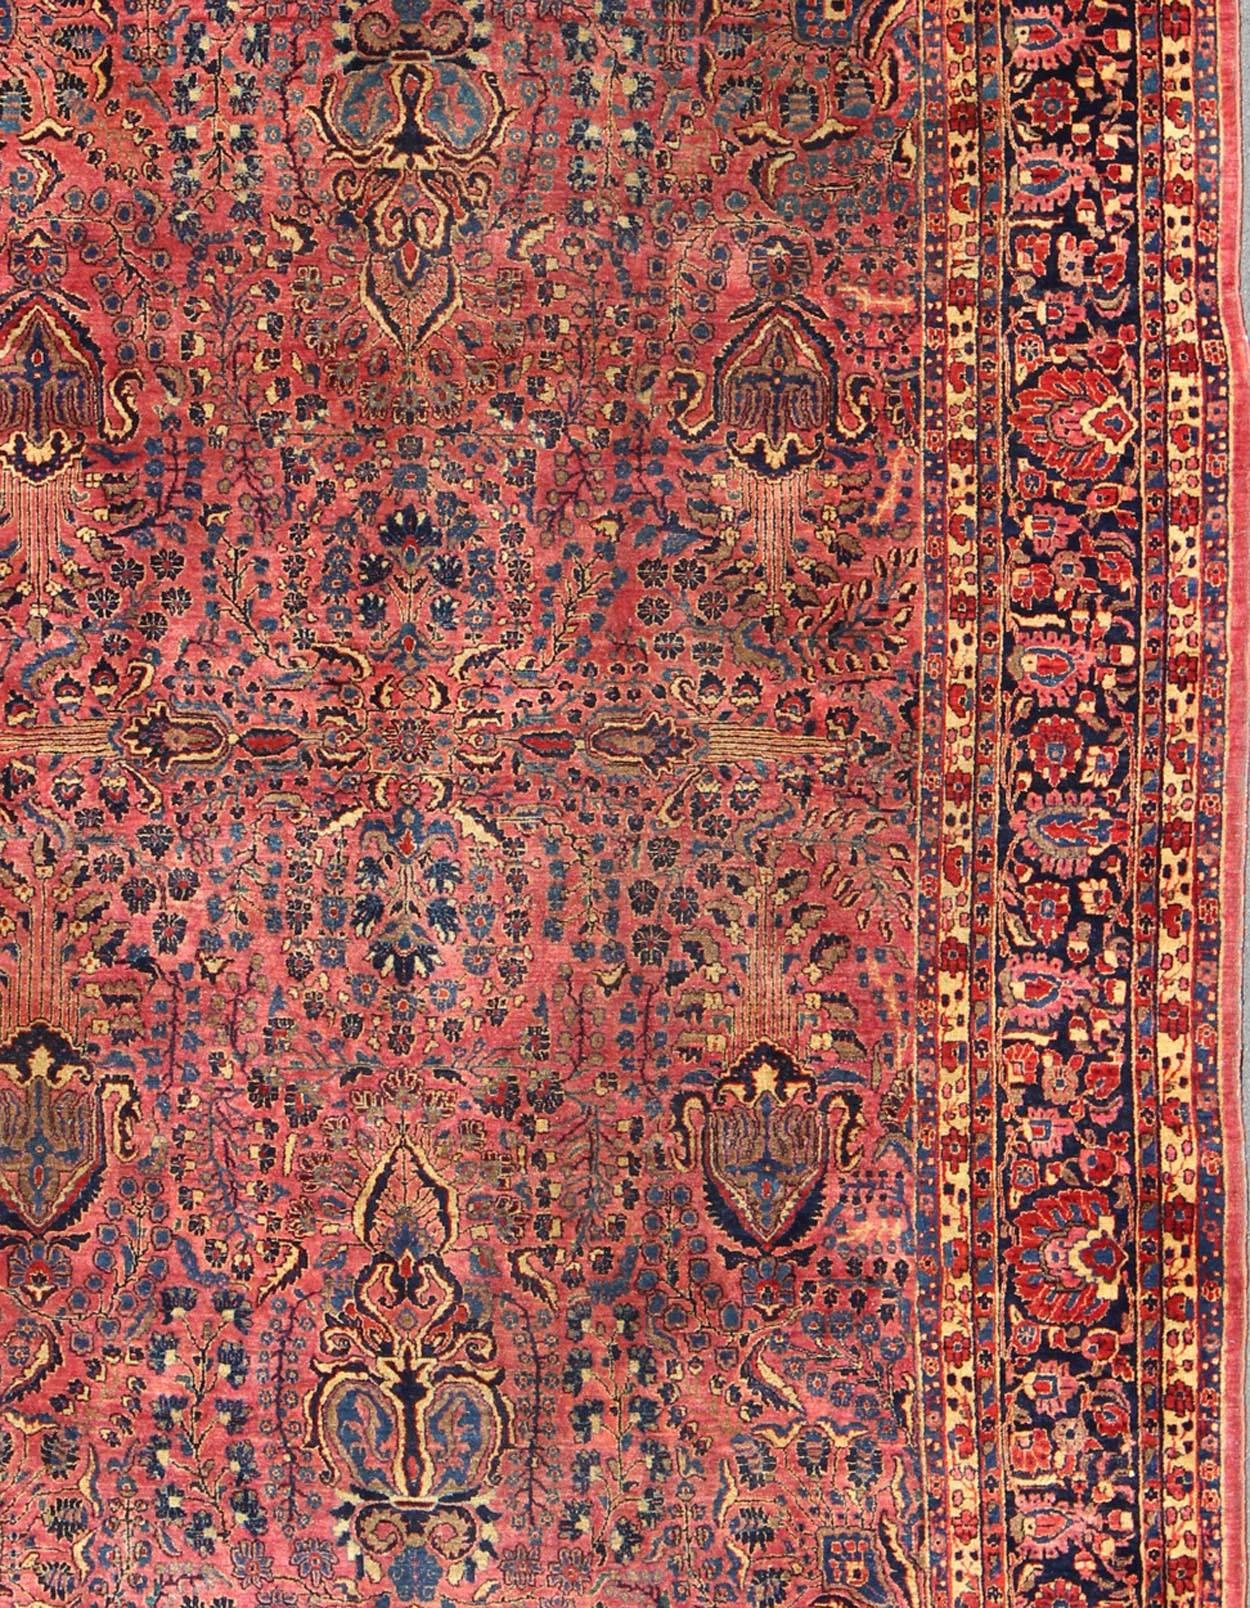 Hand-Knotted Antique Persian Sarouk Carpet with Deep Cranberry Field and Floral Elements